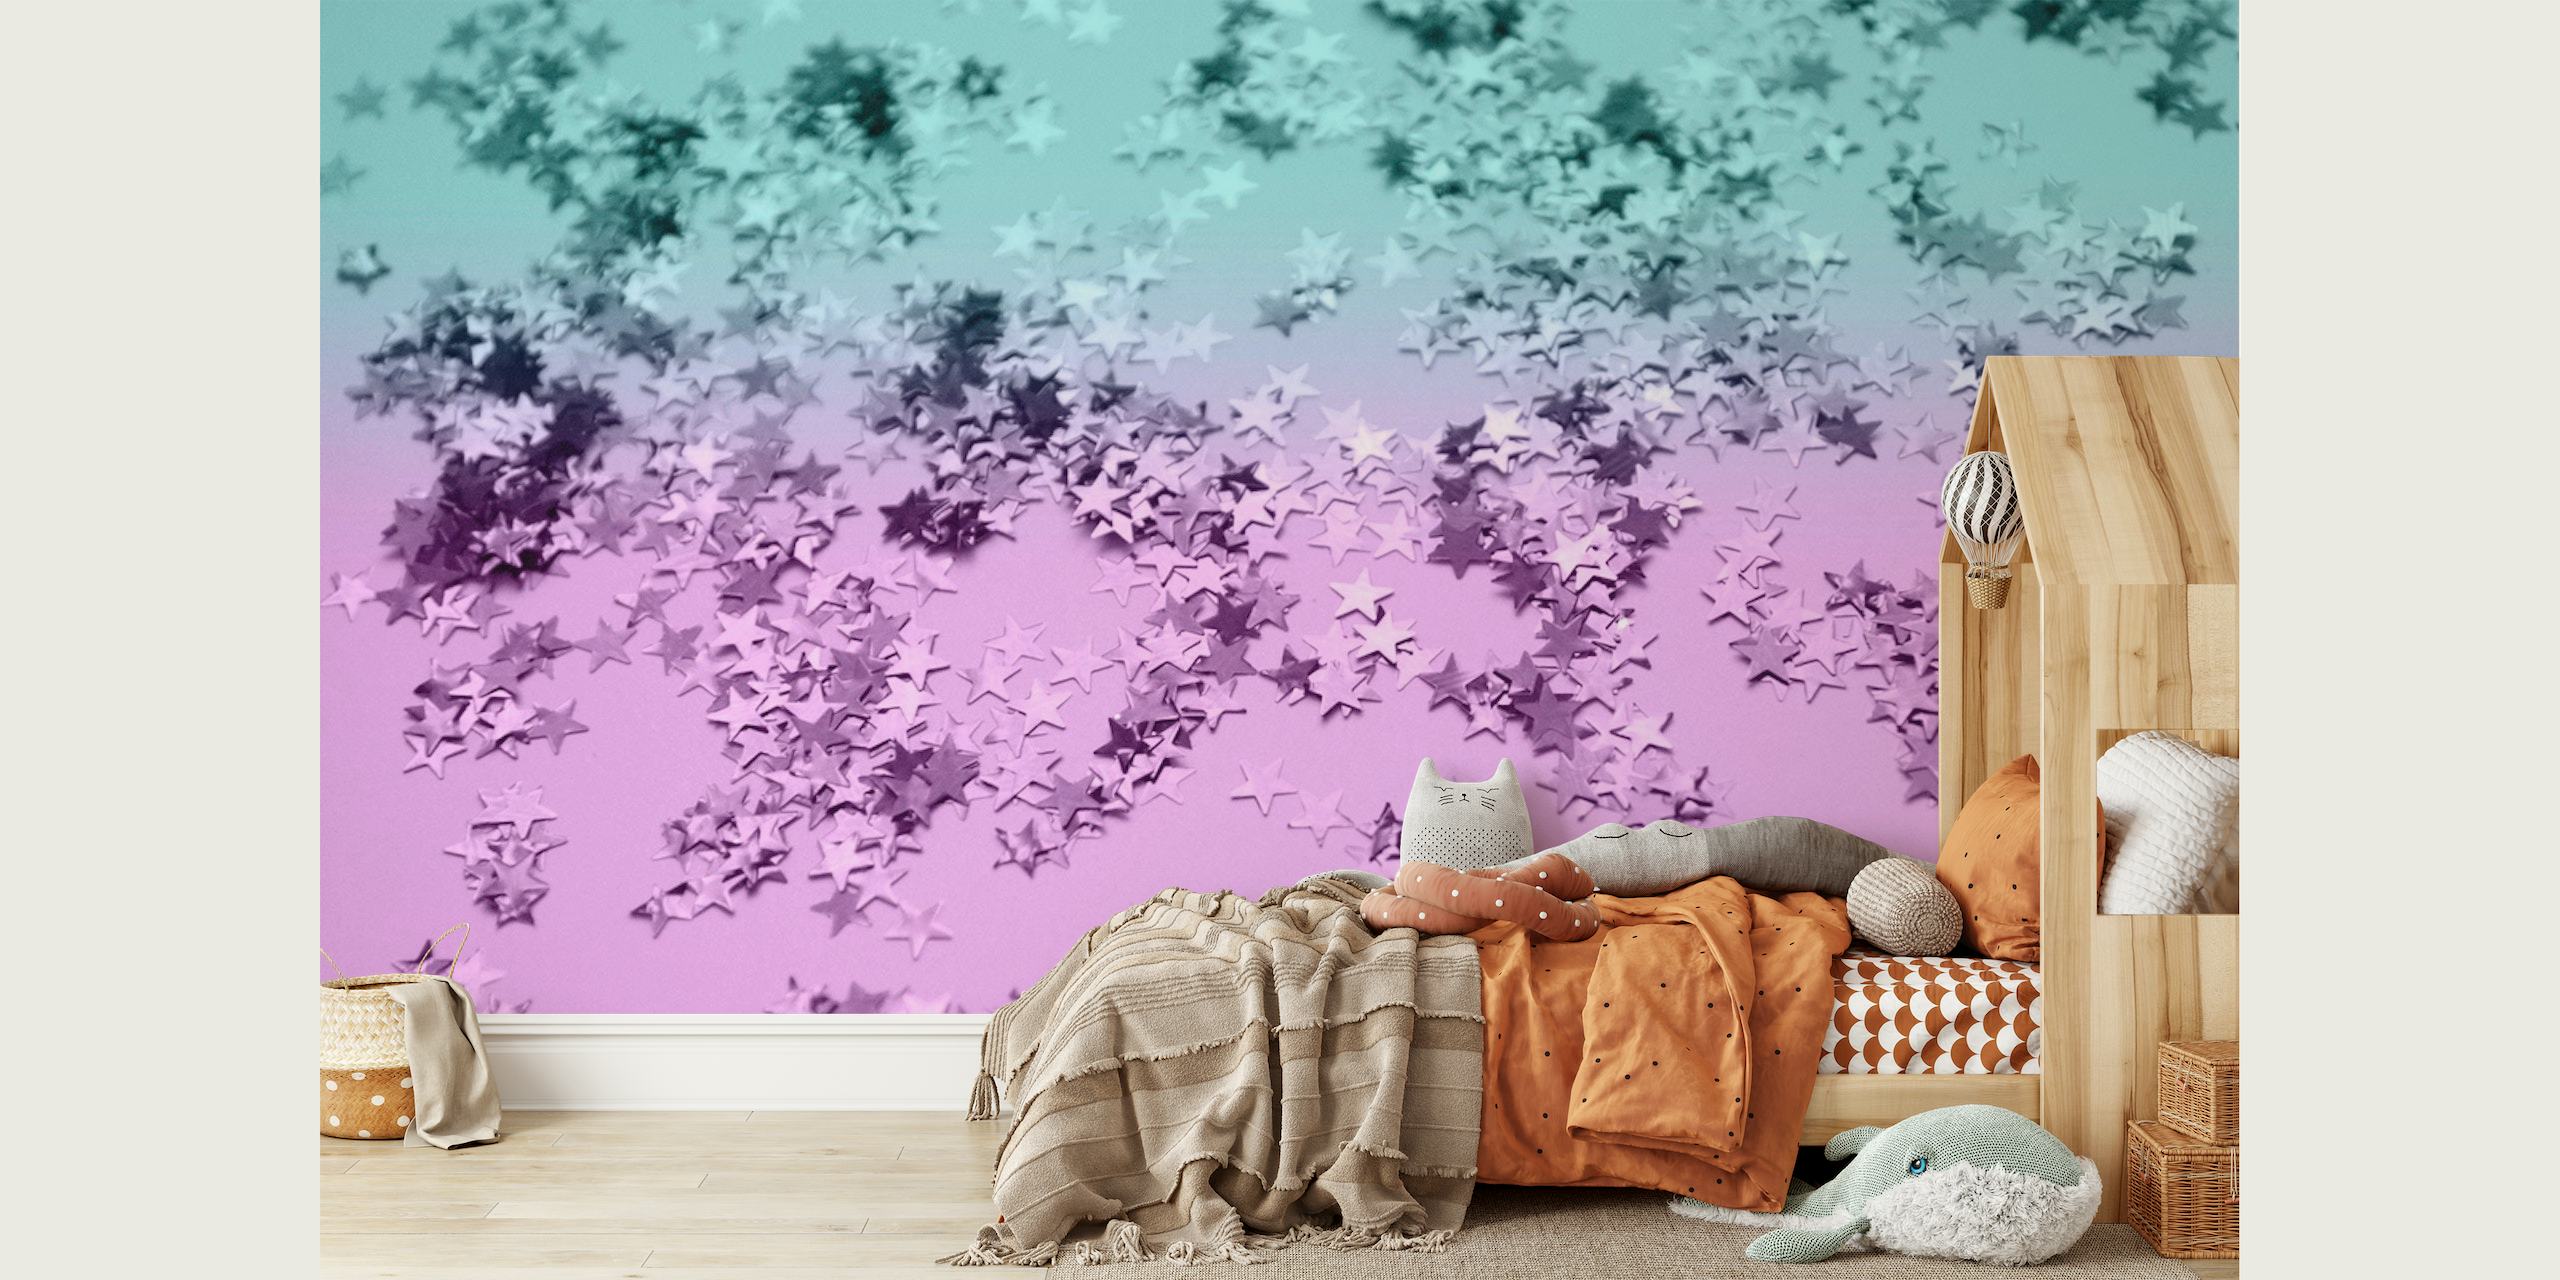 Mermaid theme gradient wall mural with glittering stars in teal and pink shades